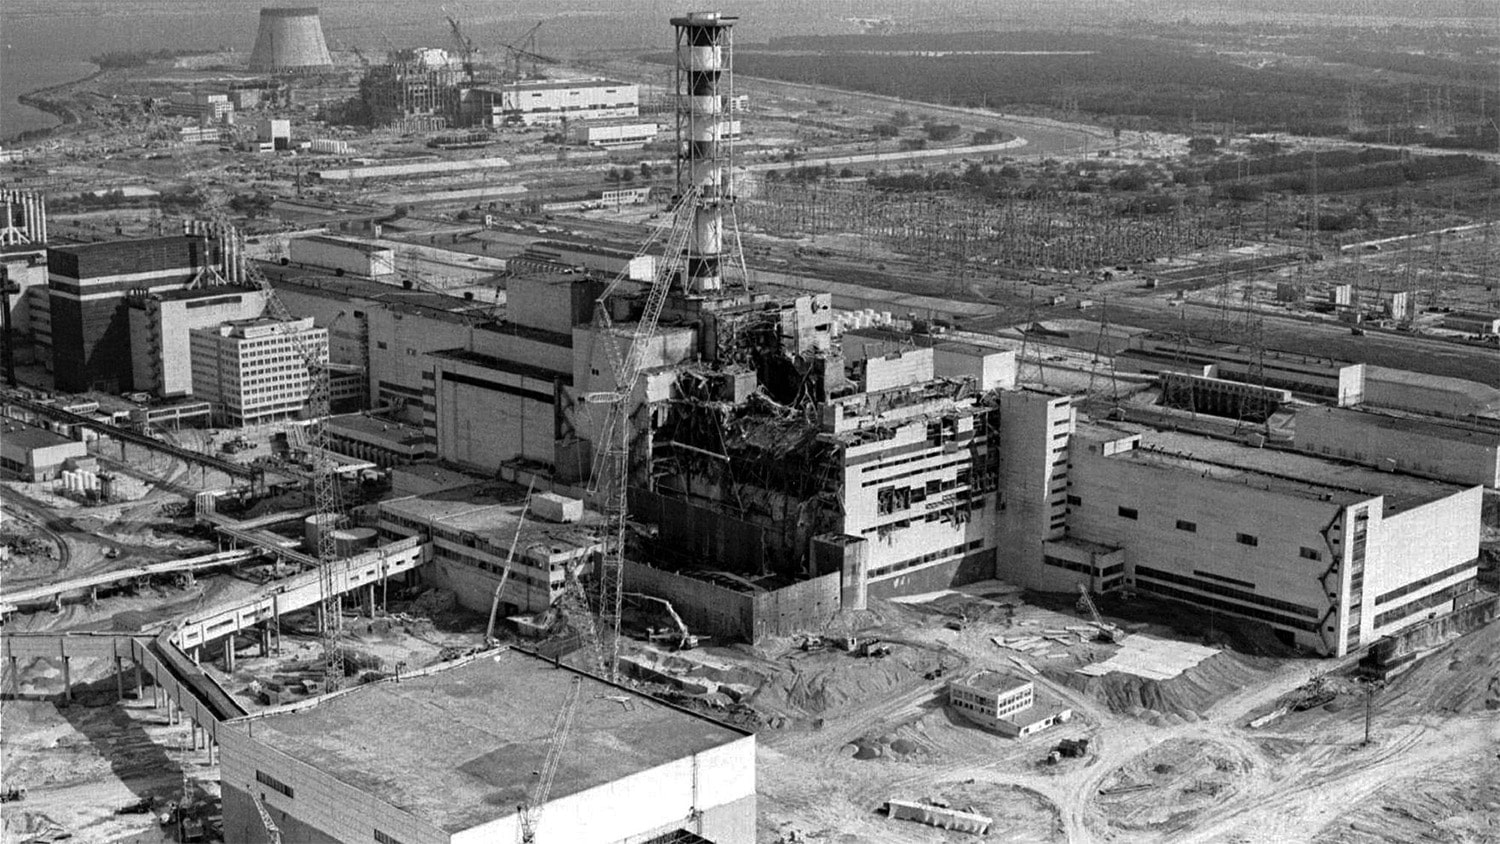 29 interesting facts about Chernobyl Disaster